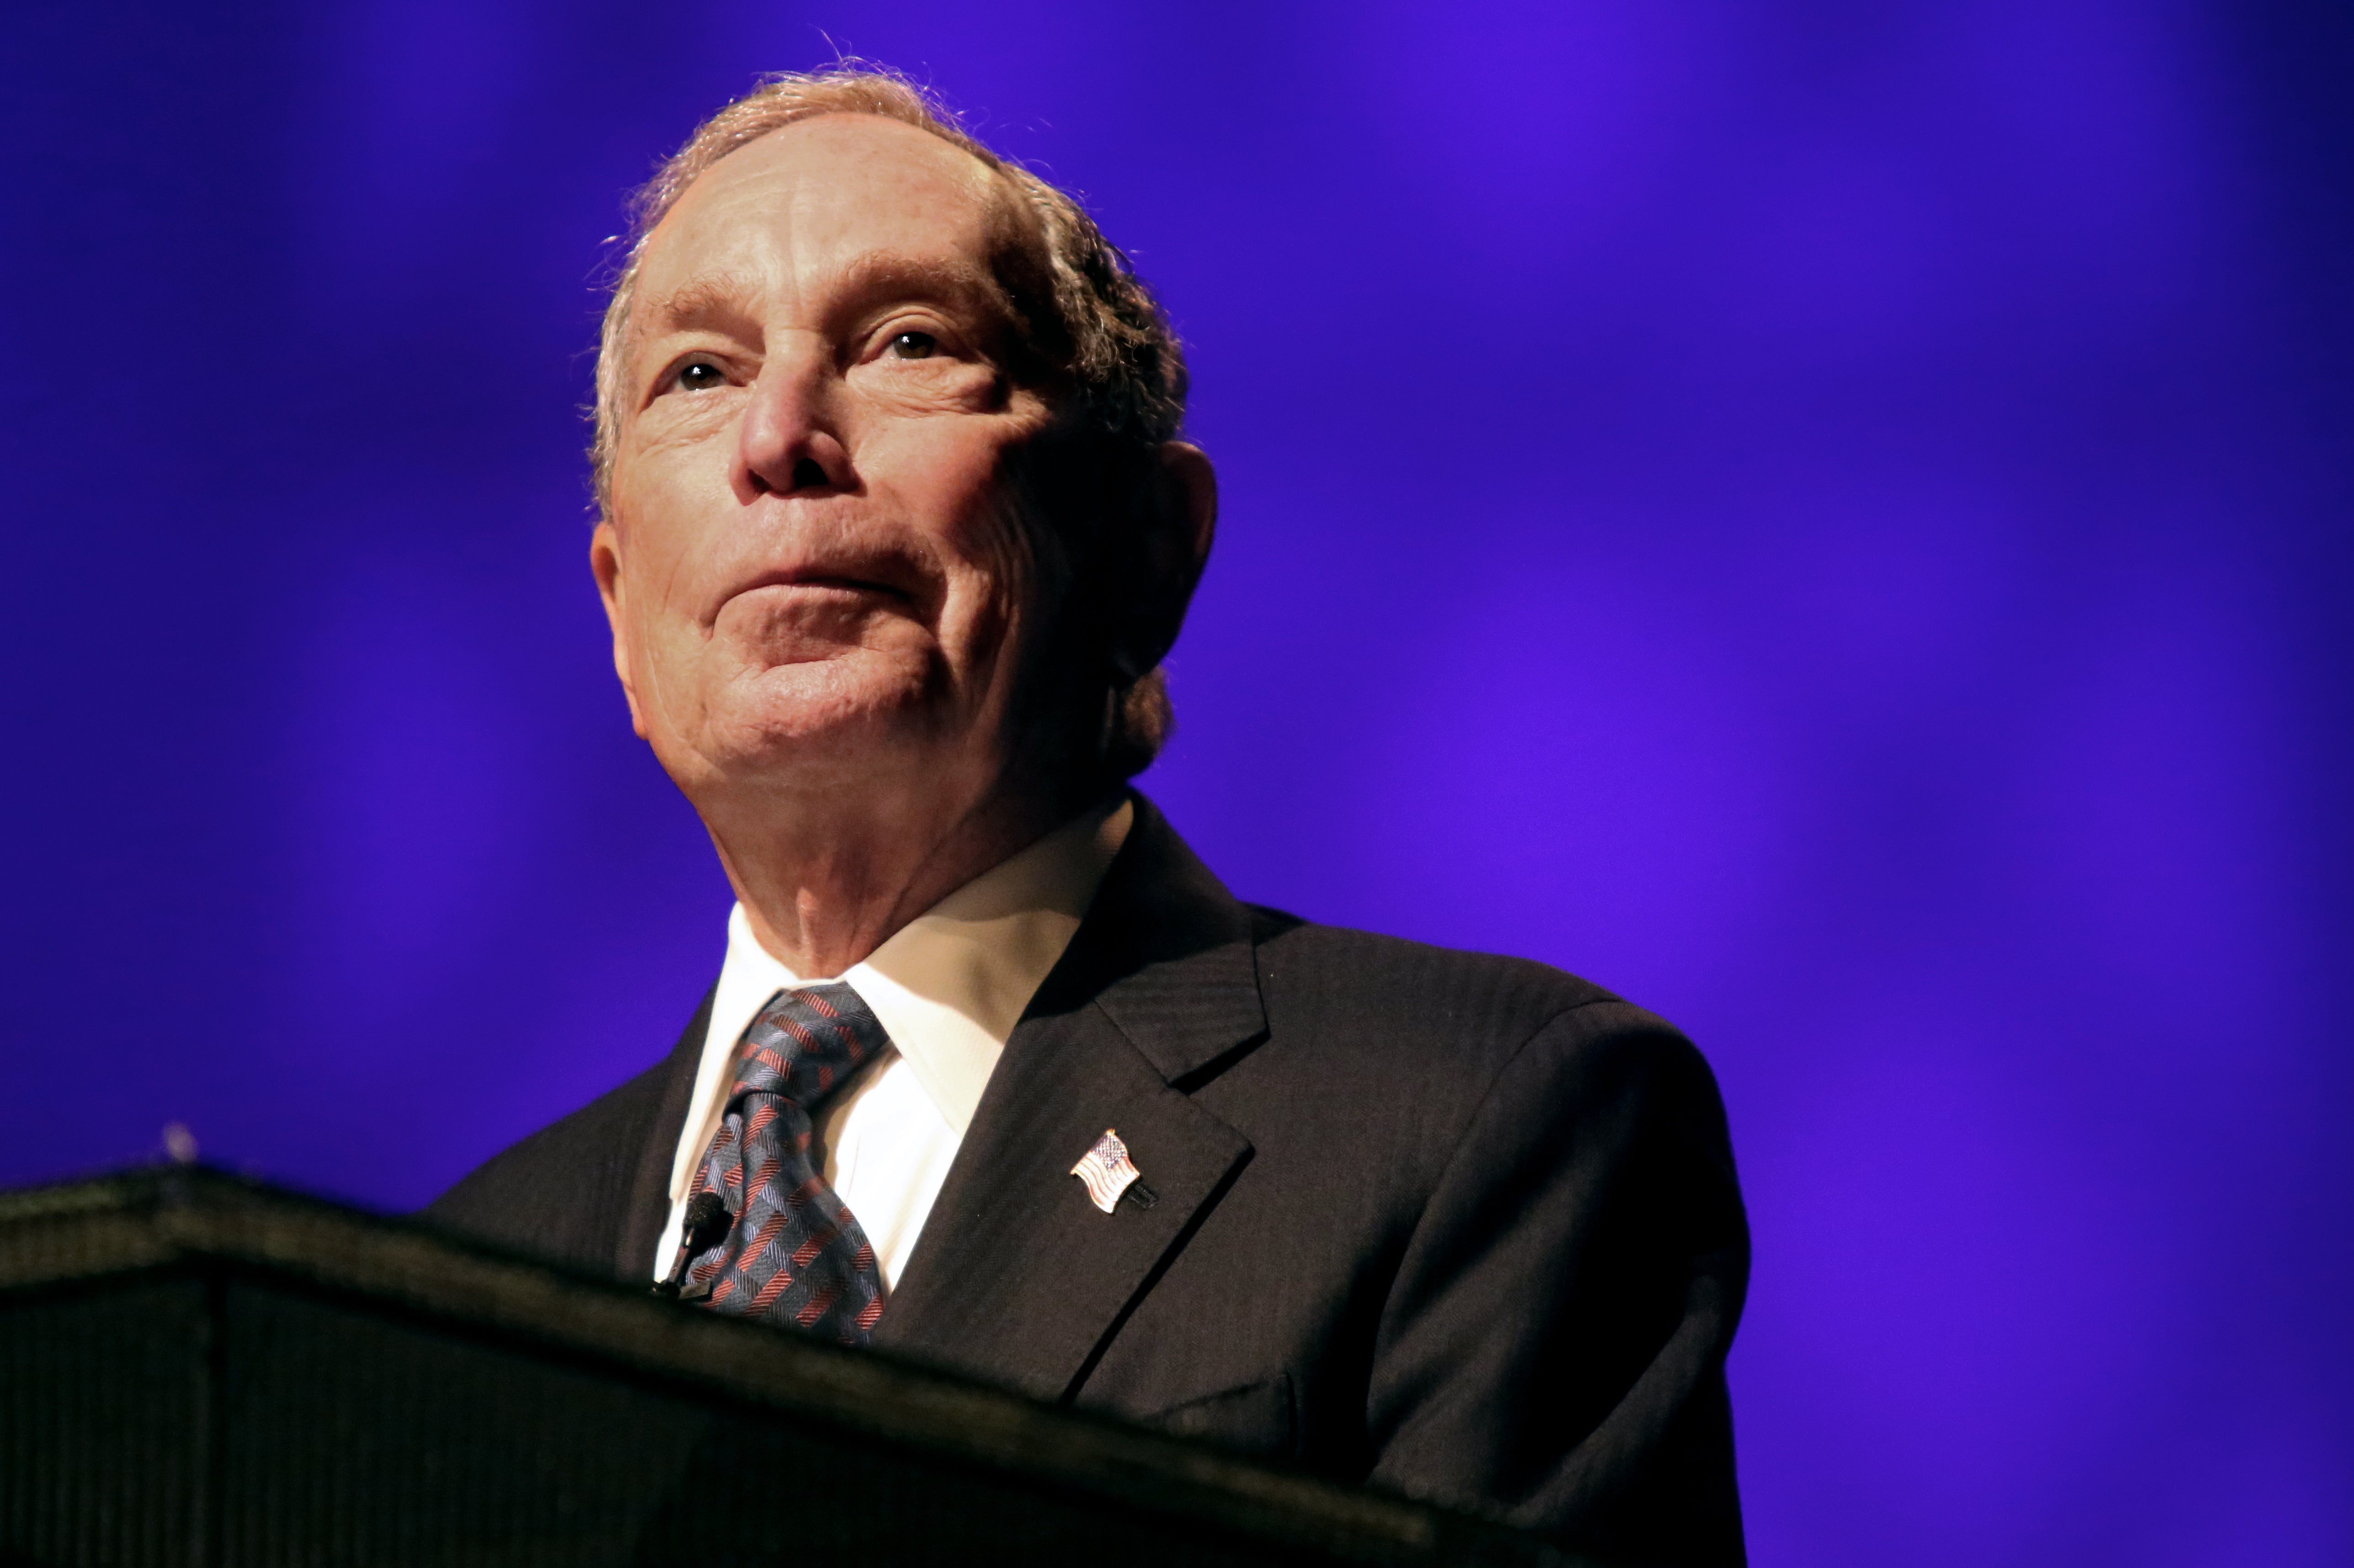 Michael Bloomberg Apologizes For Previous Support Of 'Stop-And-Frisk'